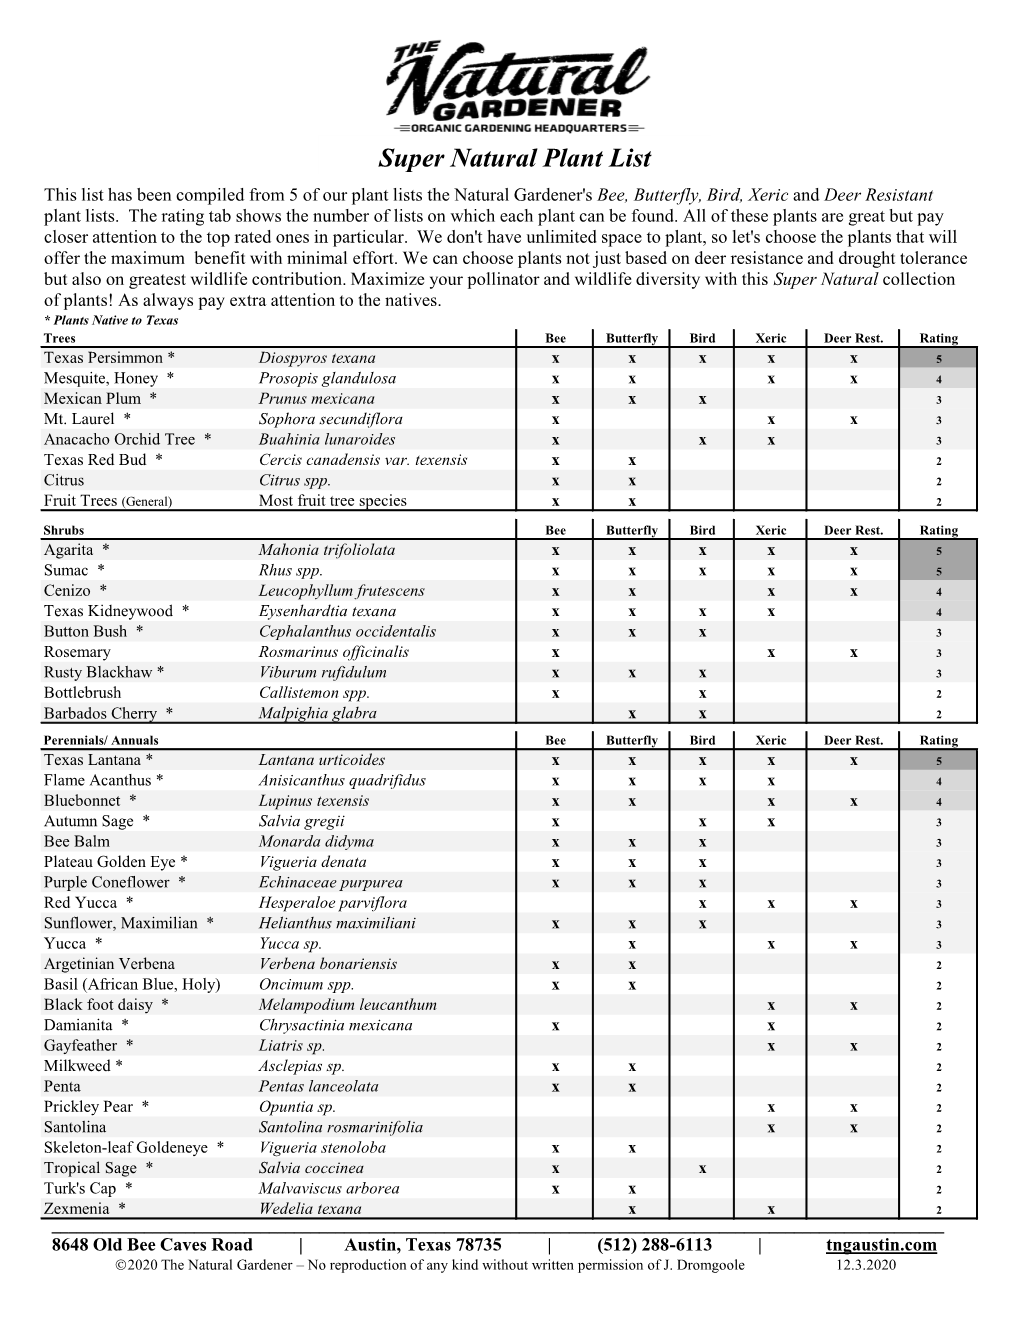 Super Natural Plant List This List Has Been Compiled from 5 of Our Plant Lists the Natural Gardener's Bee, Butterfly, Bird, Xeric and Deer Resistant Plant Lists